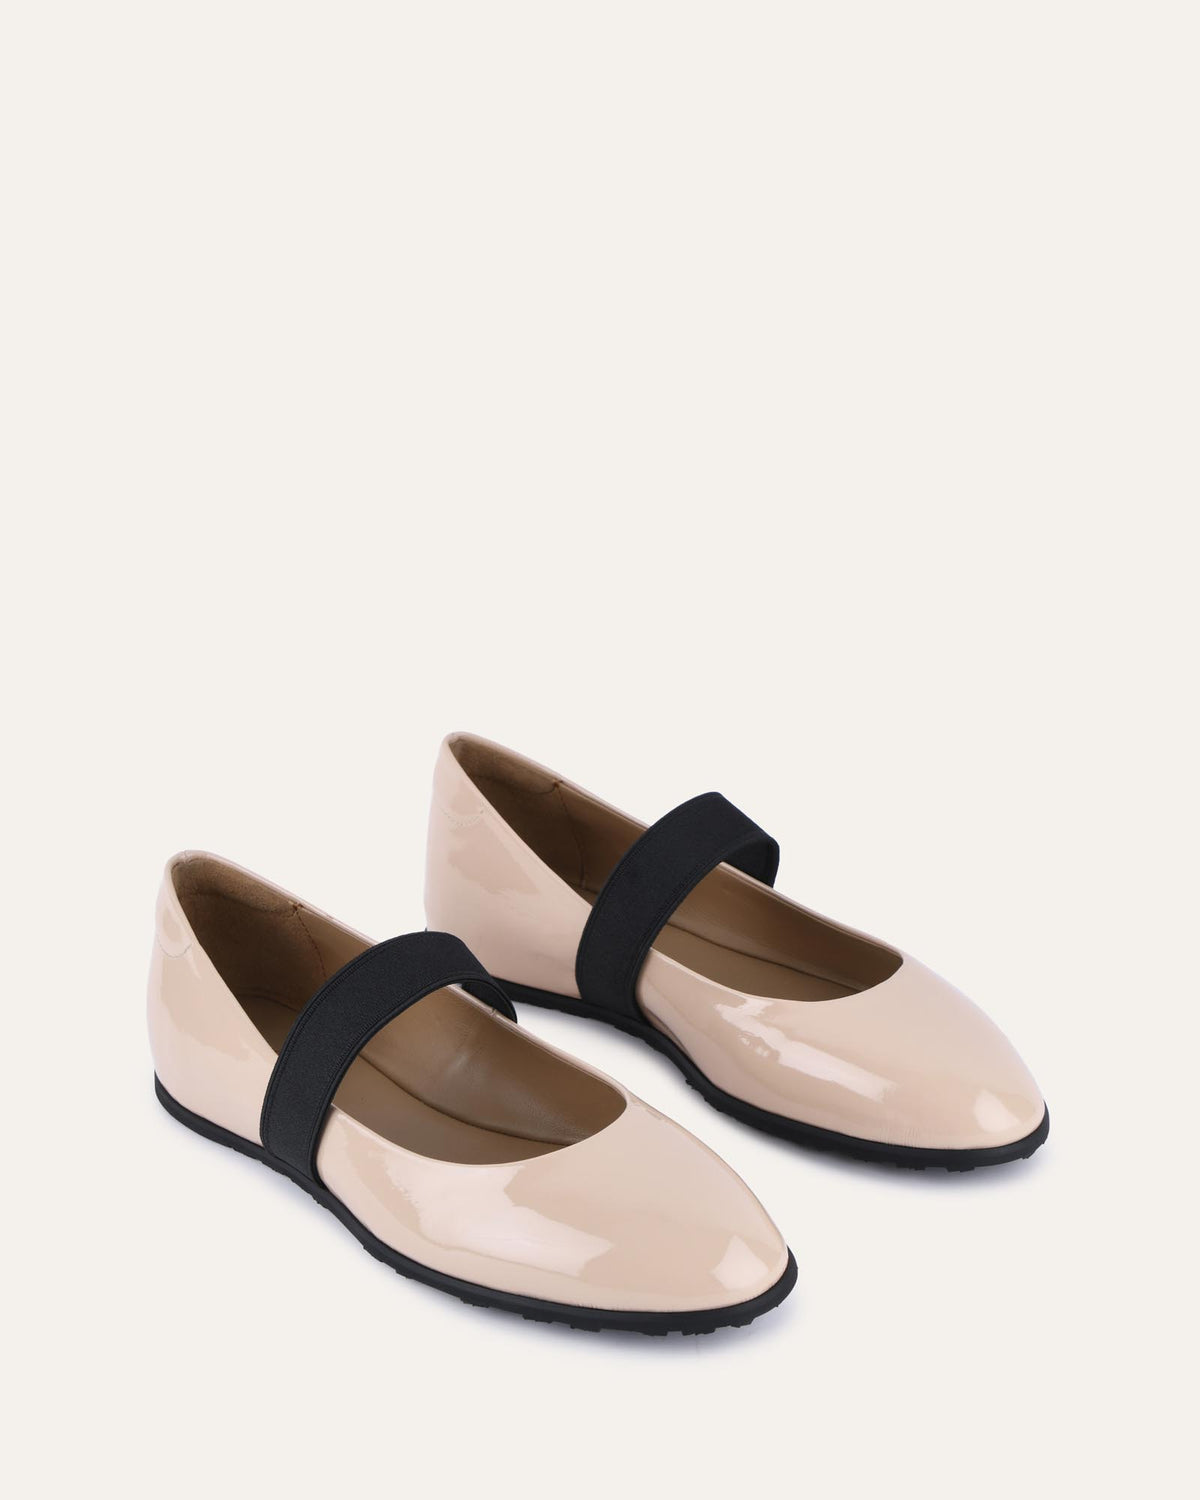 HOPE CASUAL FLATS NATURAL CRINKLE PATENT